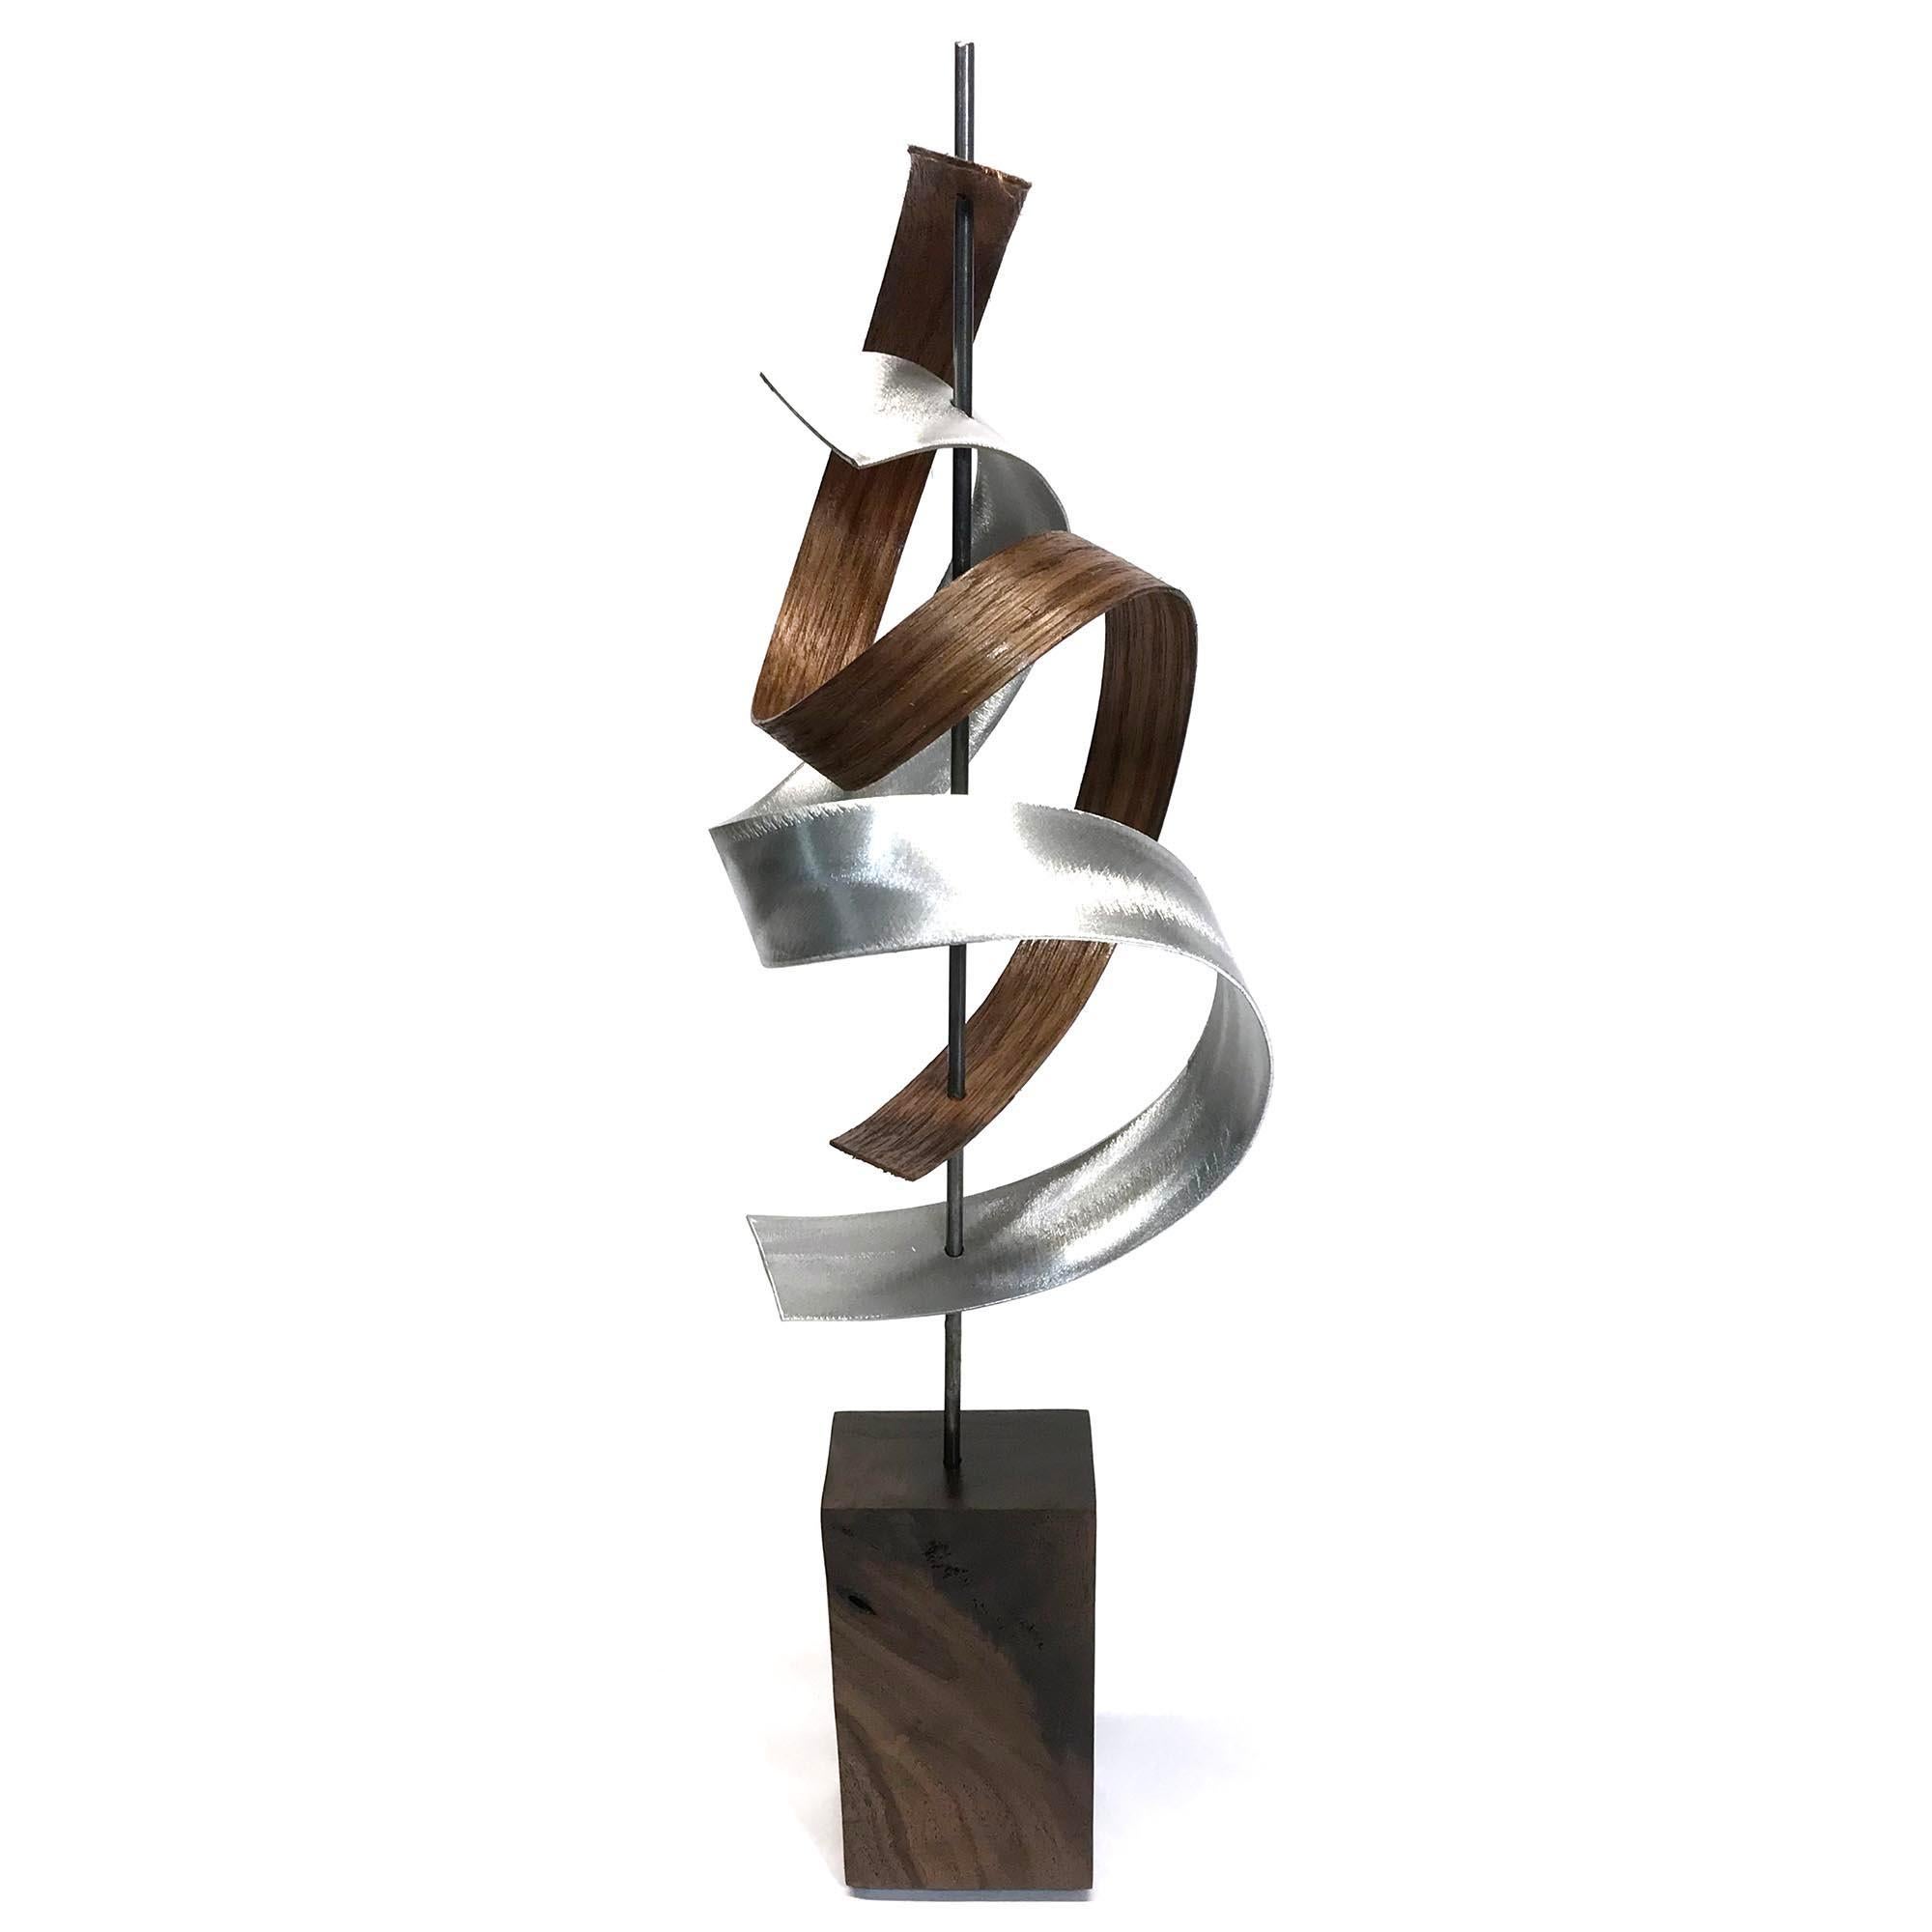 Description:  This sculpture consists of formed walnut, ash, aluminum slat with custom grind. This sculpture is an open-edition multiple original; hand-made by the artist.
Title: The Climb

Artist Bio:
Jeff was born and raised in Toledo Ohio and is